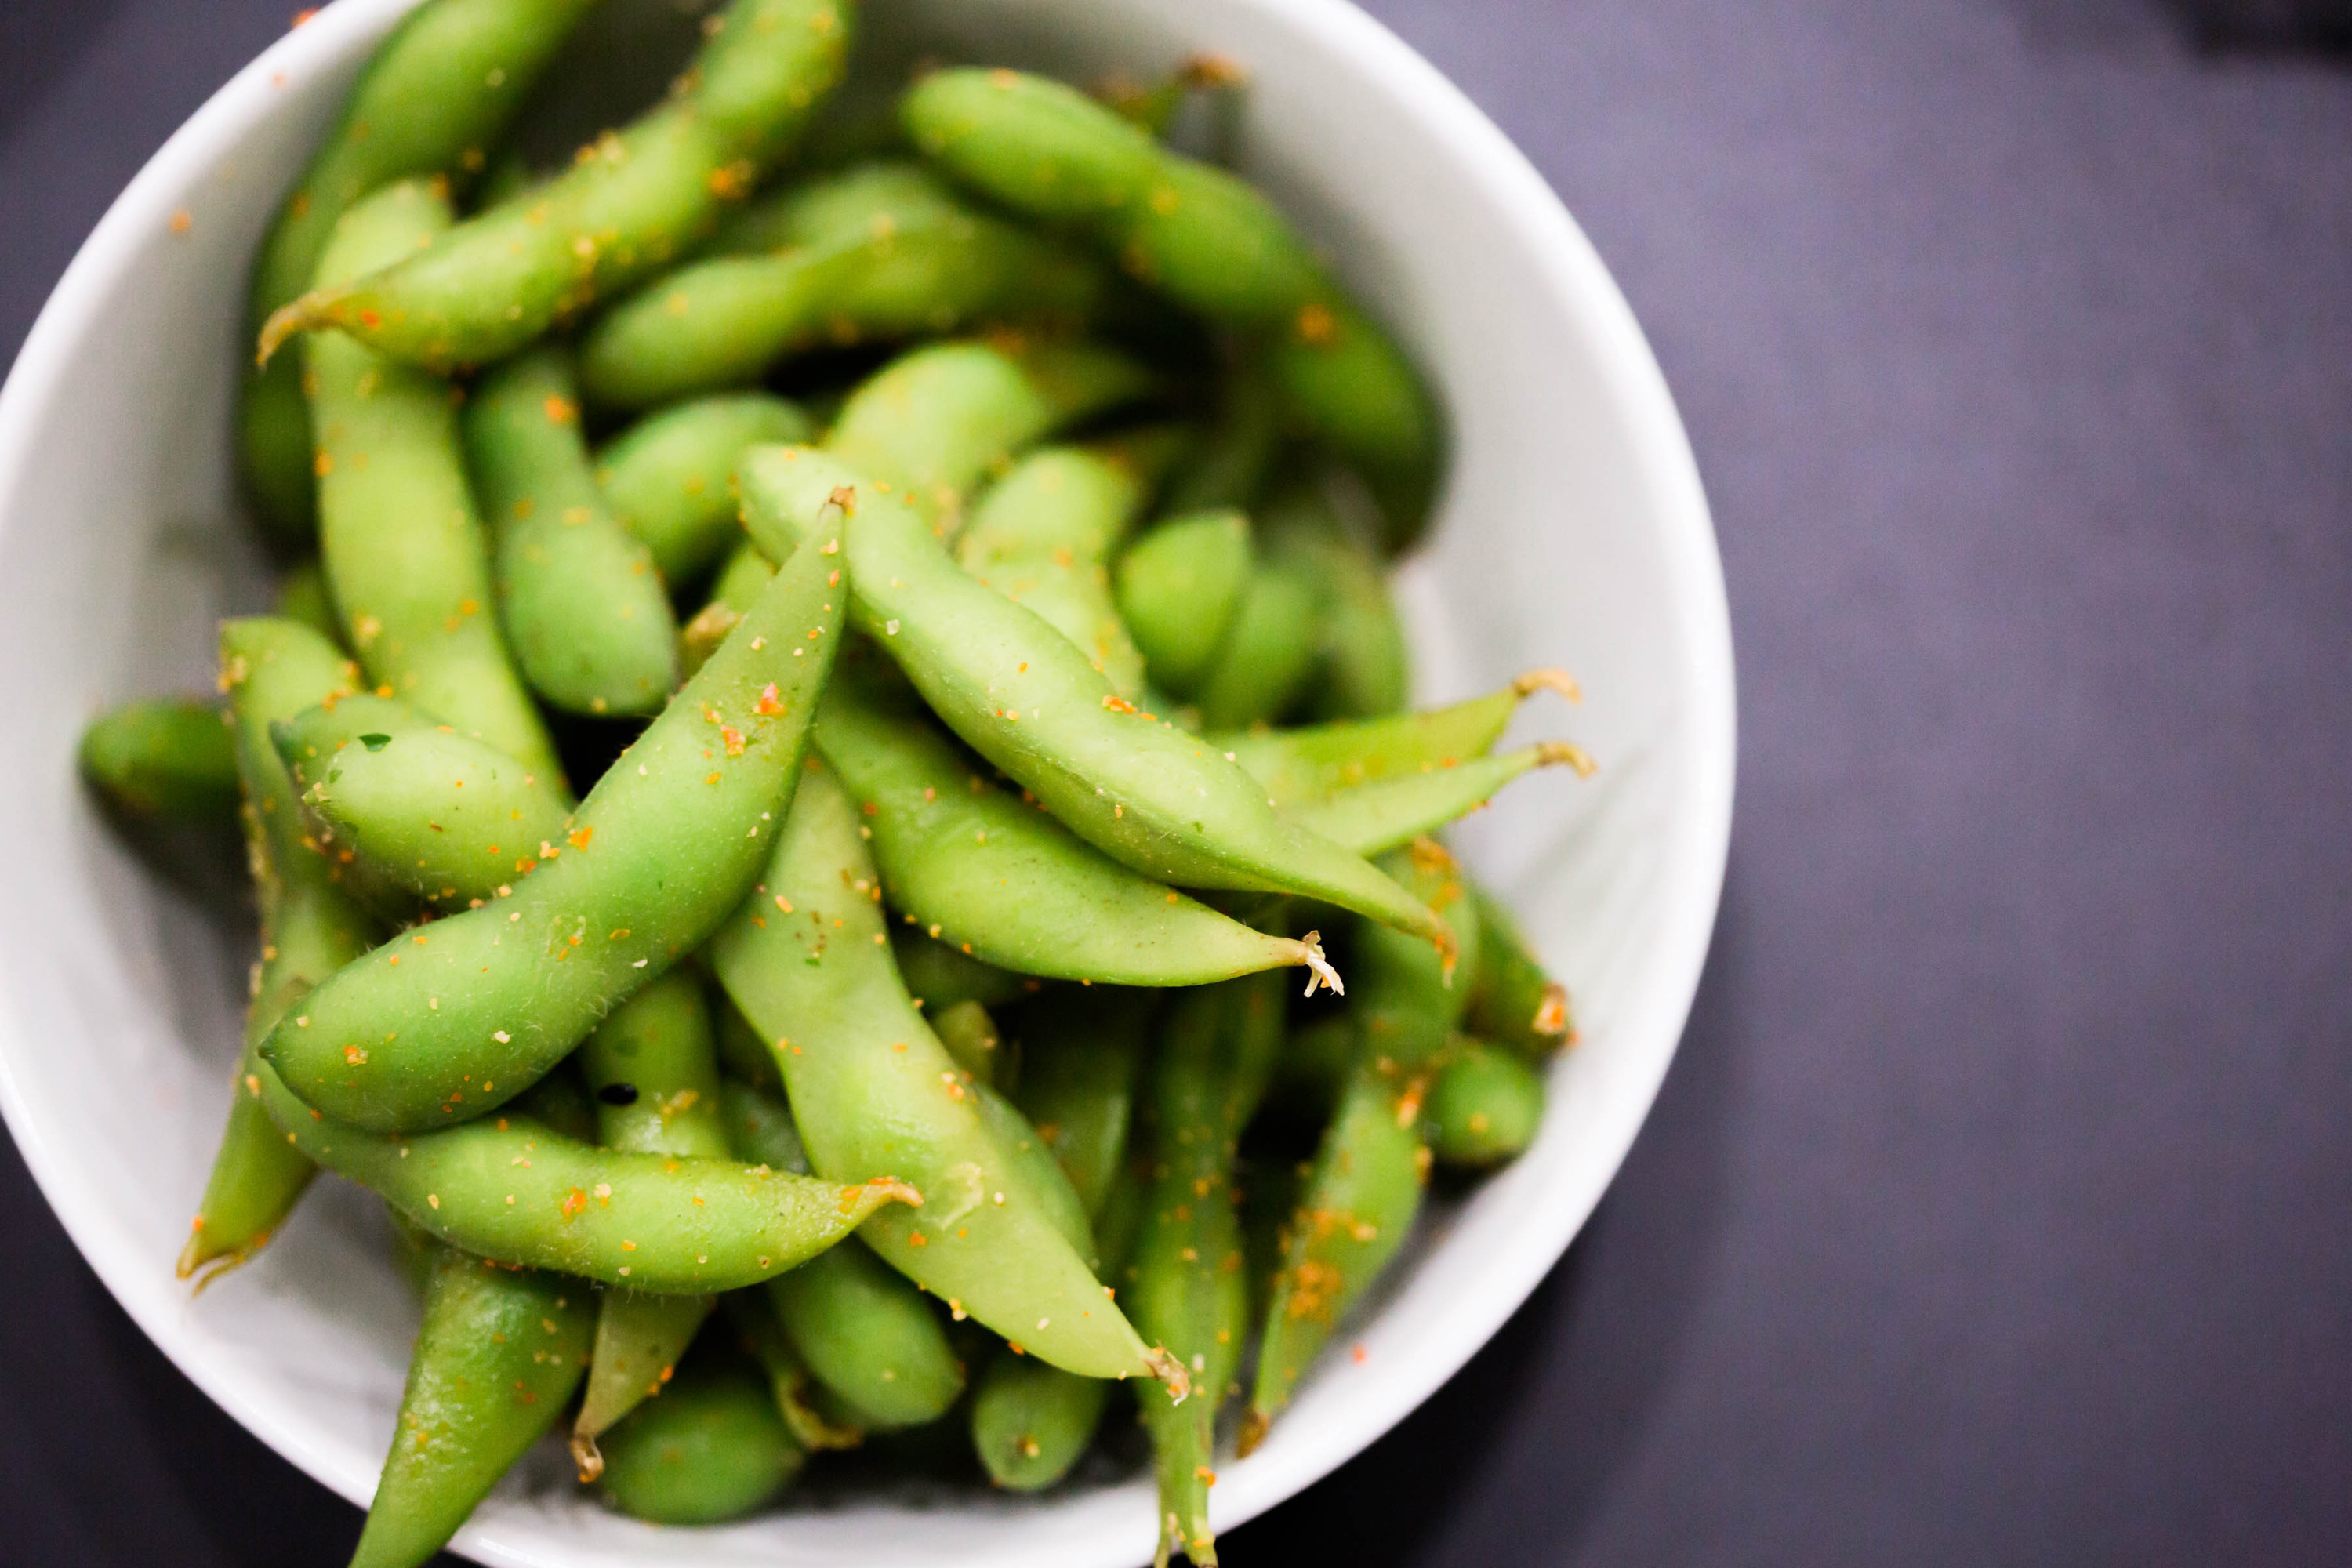 A bowl of containing edamame pods and seeds, which Megan compared her hair to